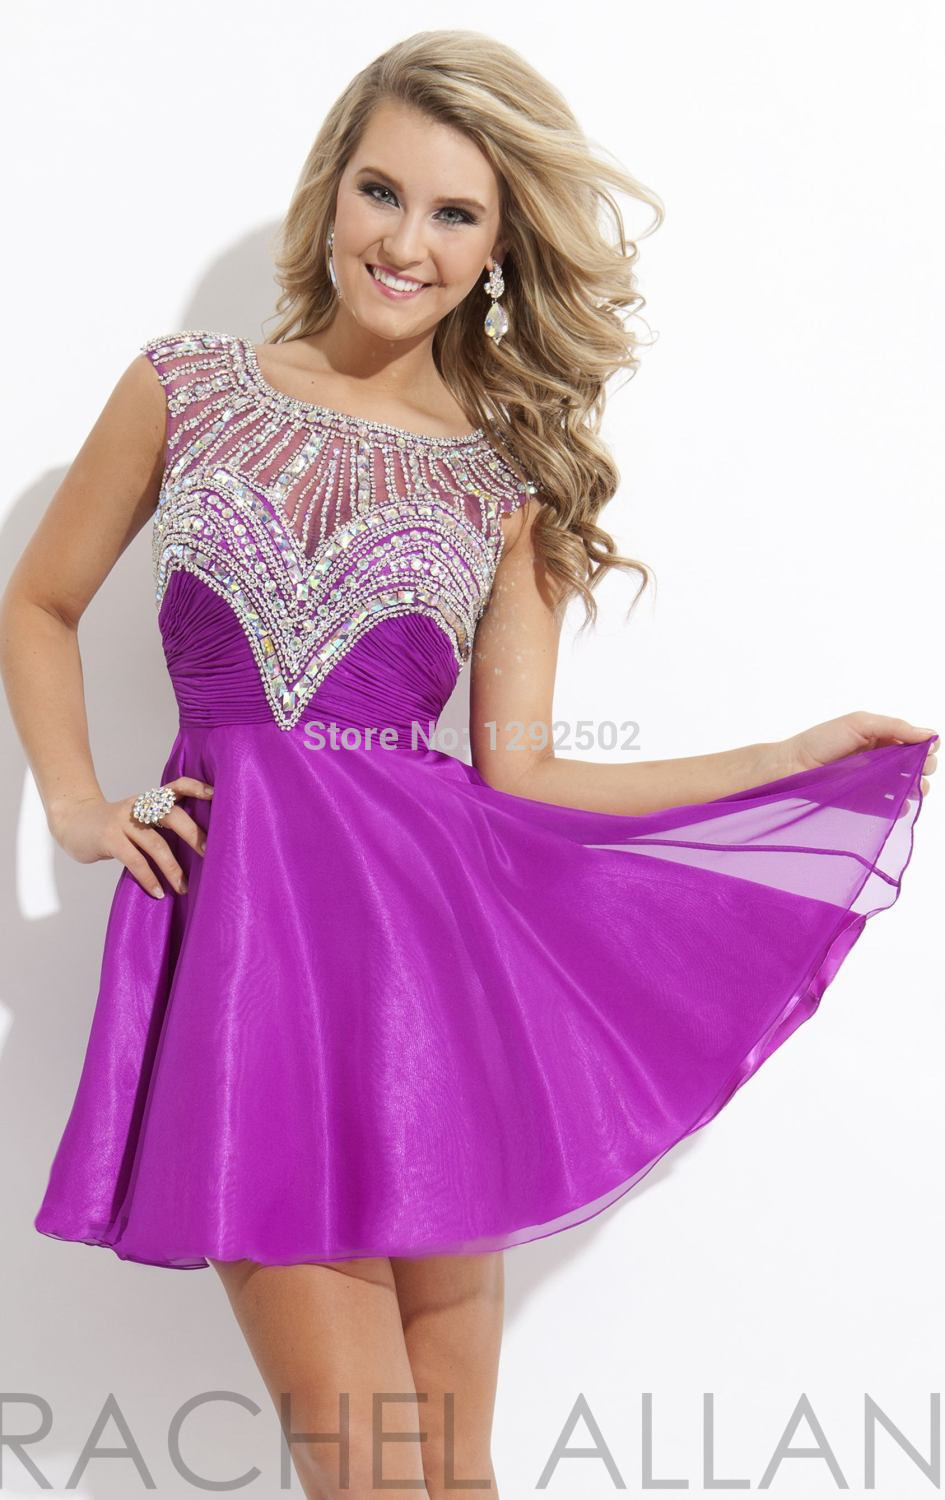 ... -Party-Short-Red-Magenta-Prom-Dresses-Homecoming-Dresses-Size.jpg